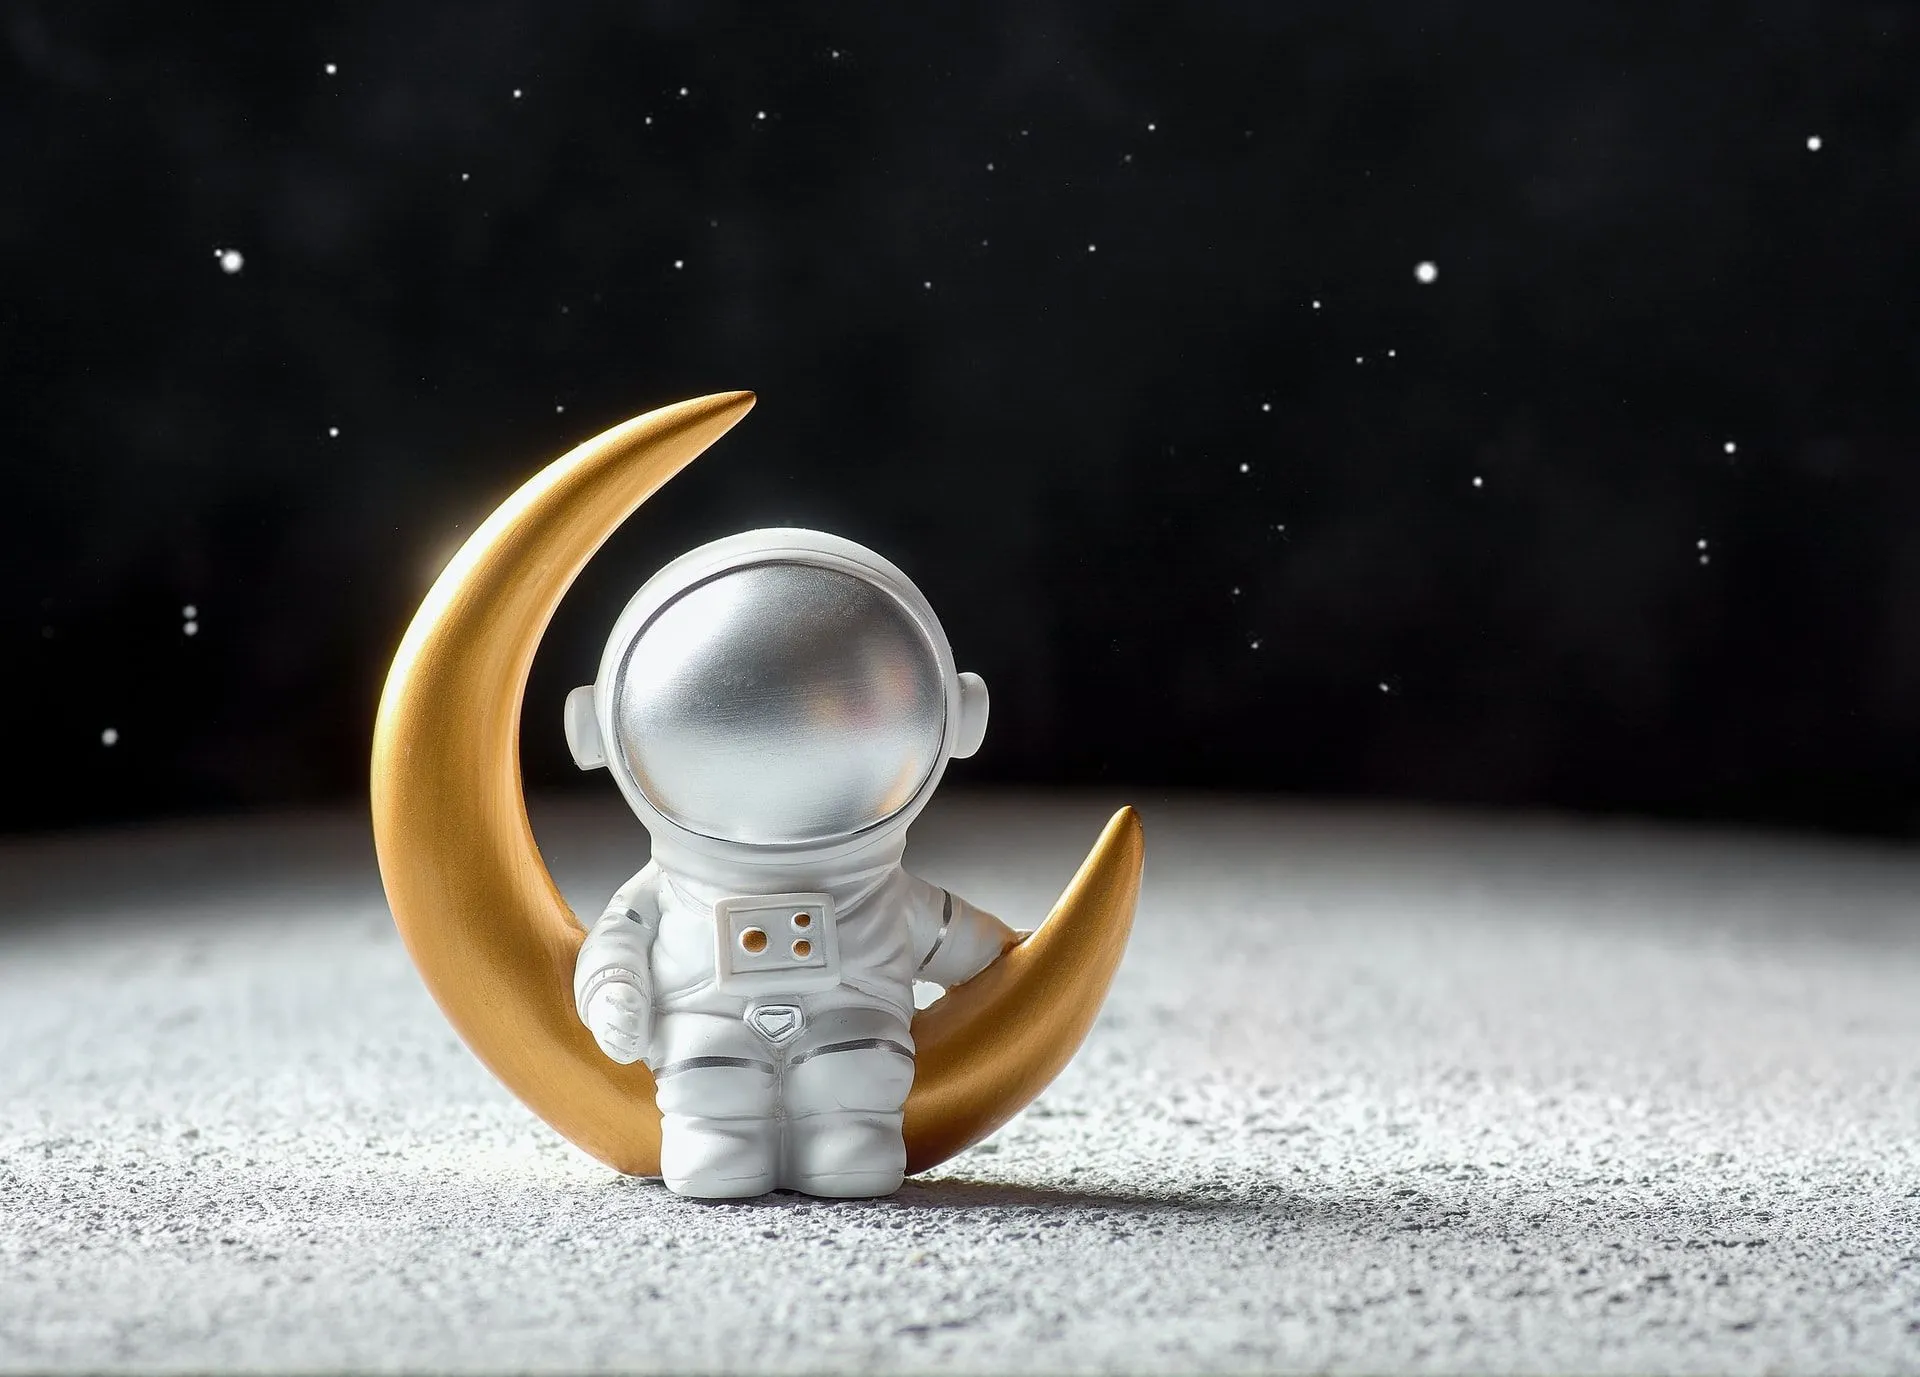 Miniature astronaut and golden moon with stars in the sky